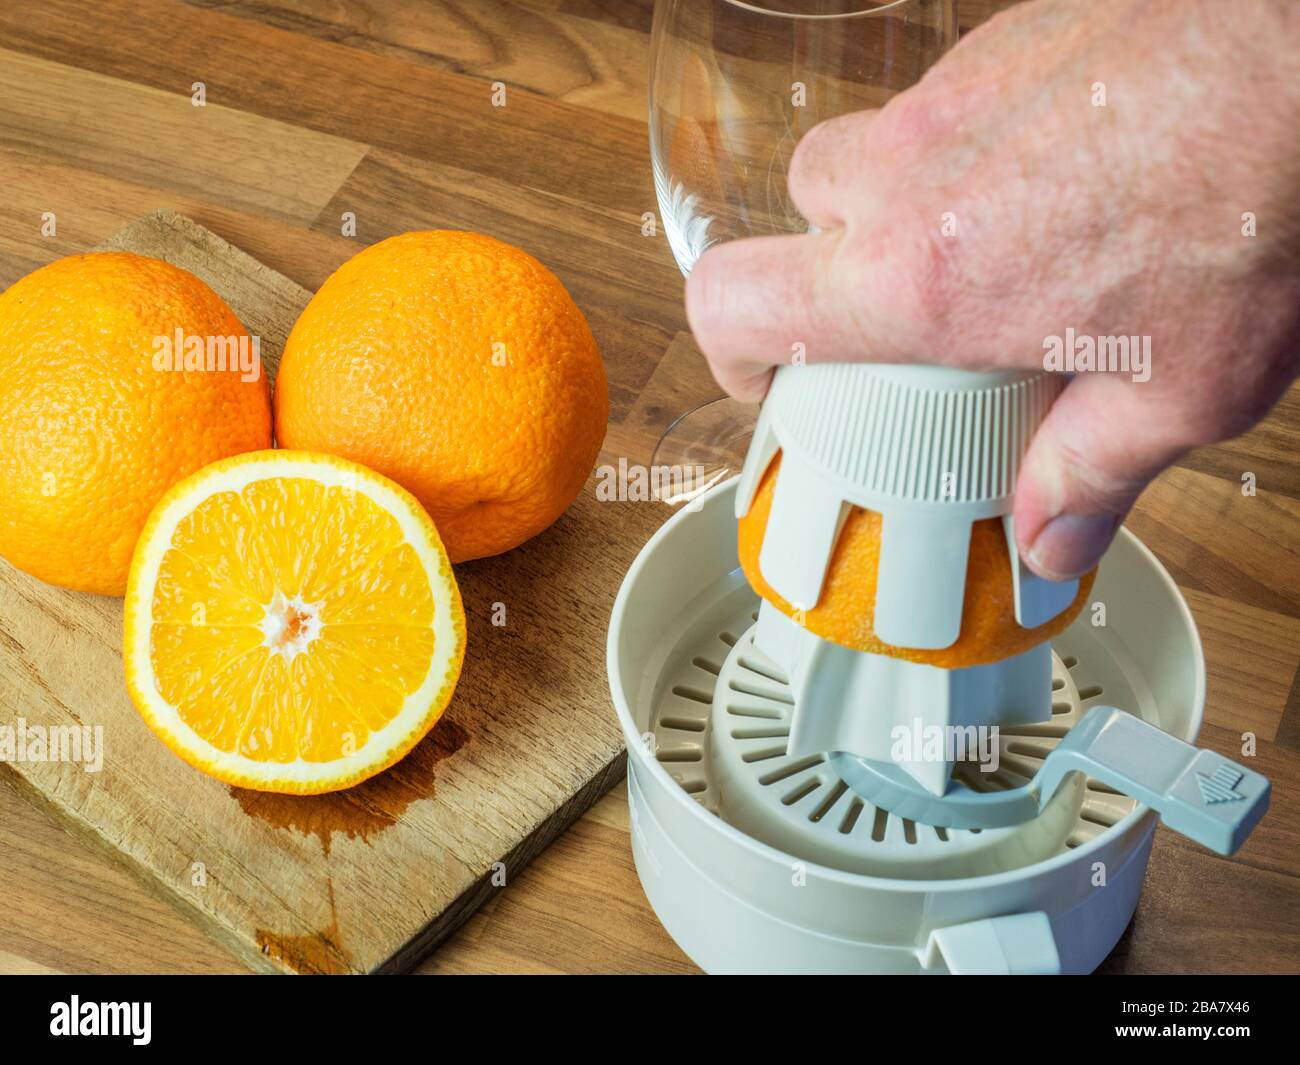 Oranges and half orange on a chopping board and a hand squeezing an orange with an orange squeezer on a wood block kitchen worktop Stock Photo